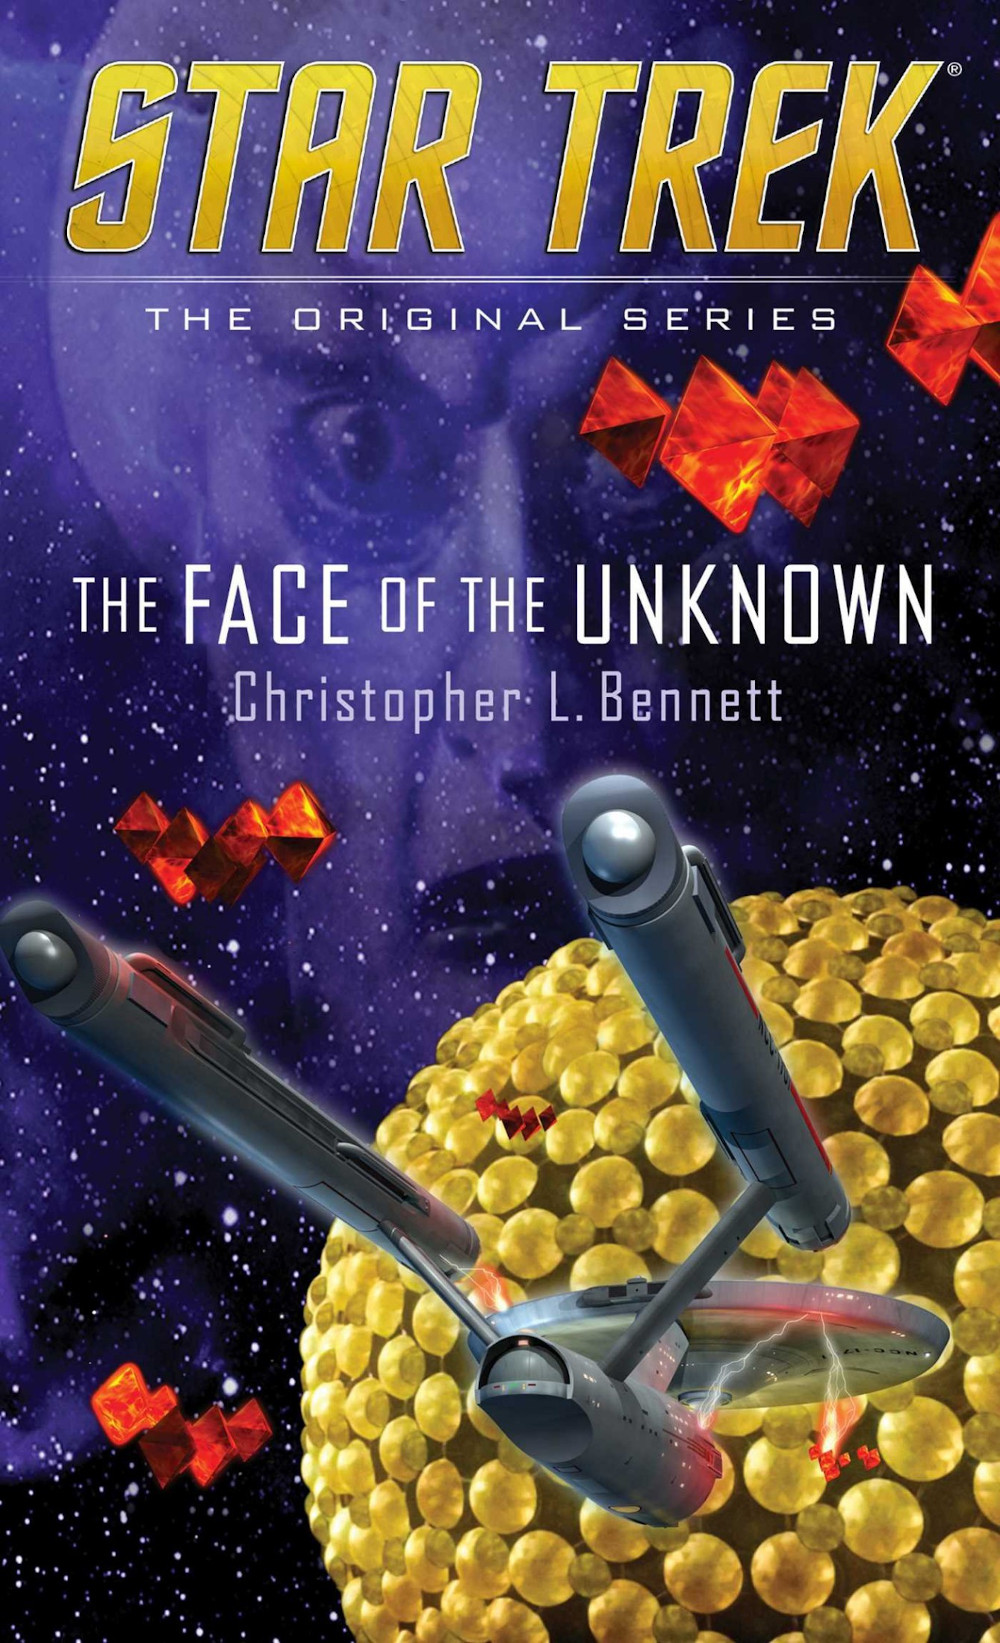 The Face of the Unknown (Dec 2016)